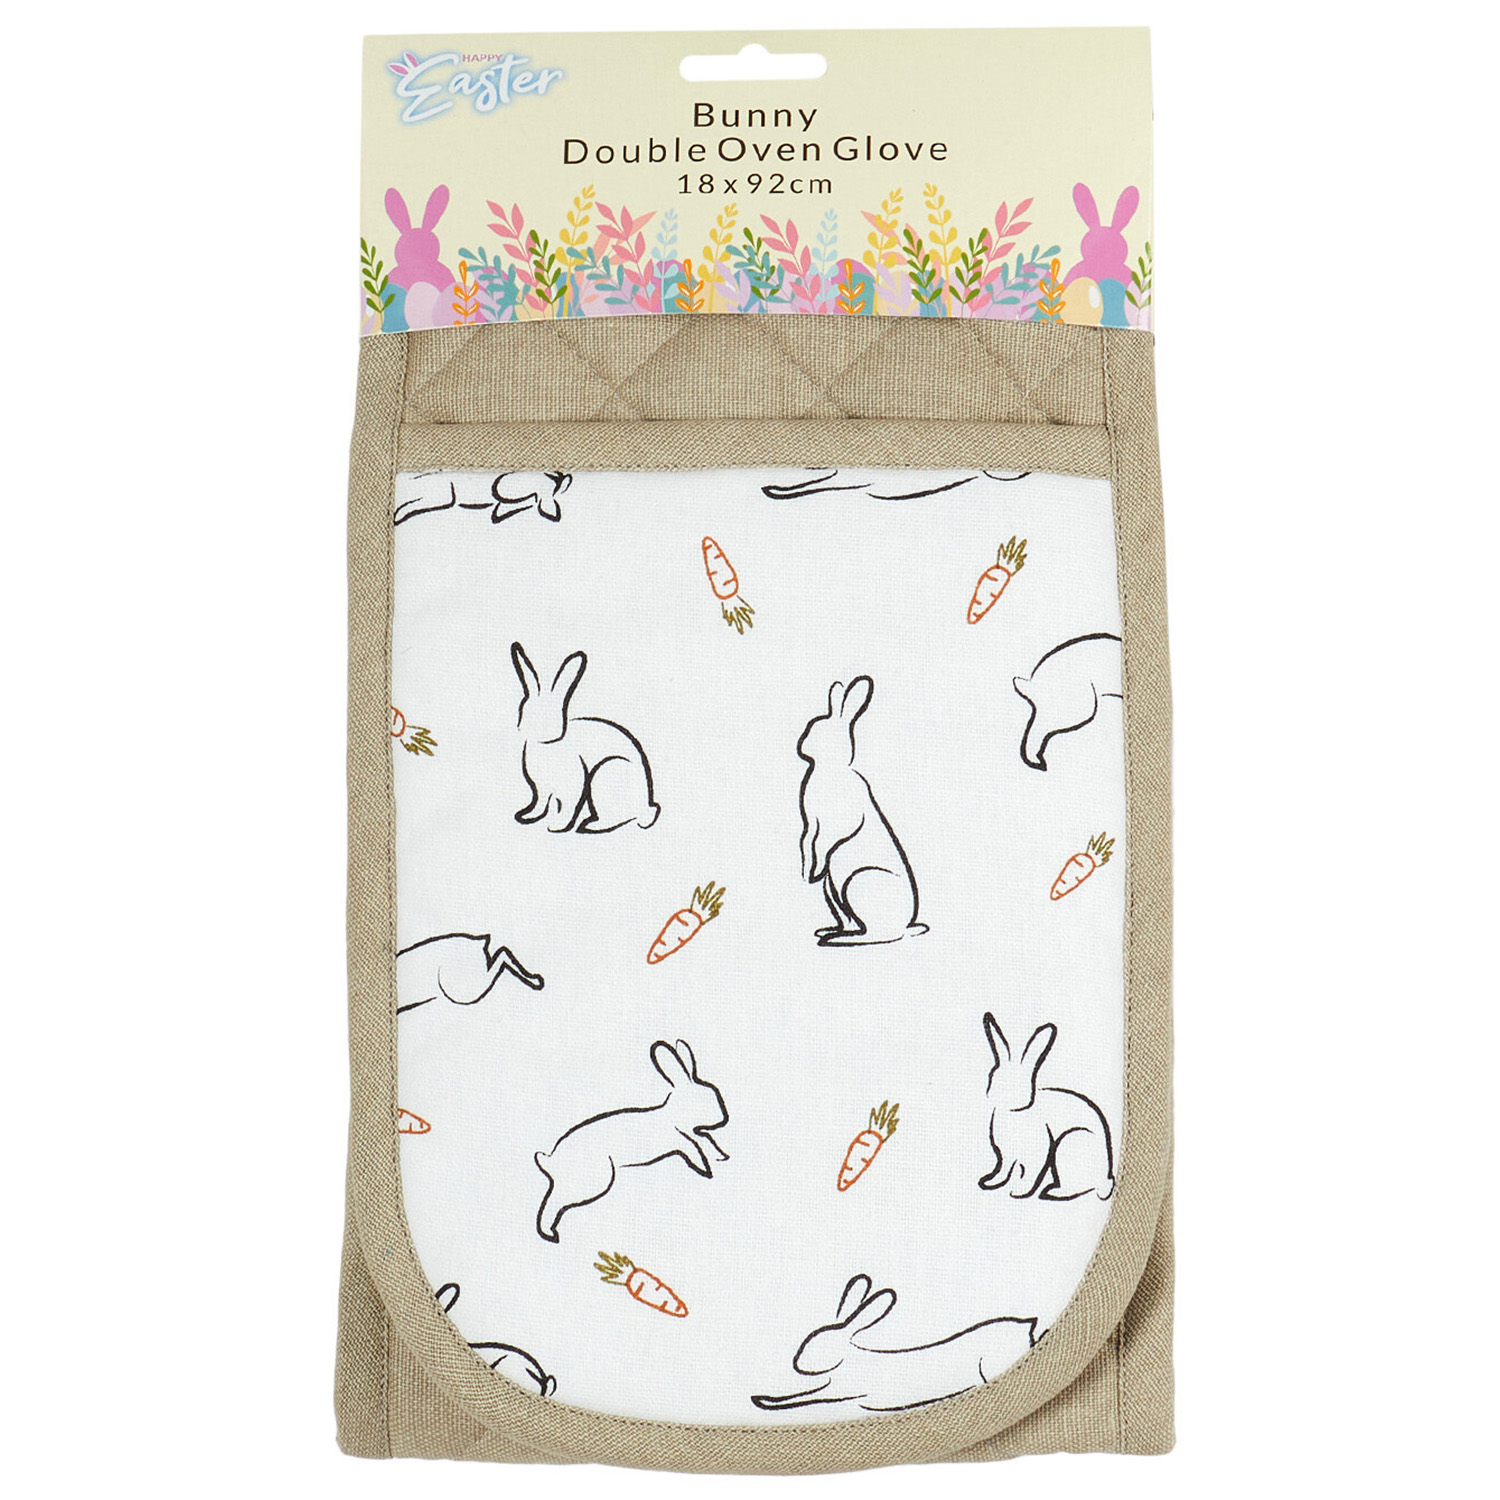 Bunny Double Oven Gloves - Natural Image 1